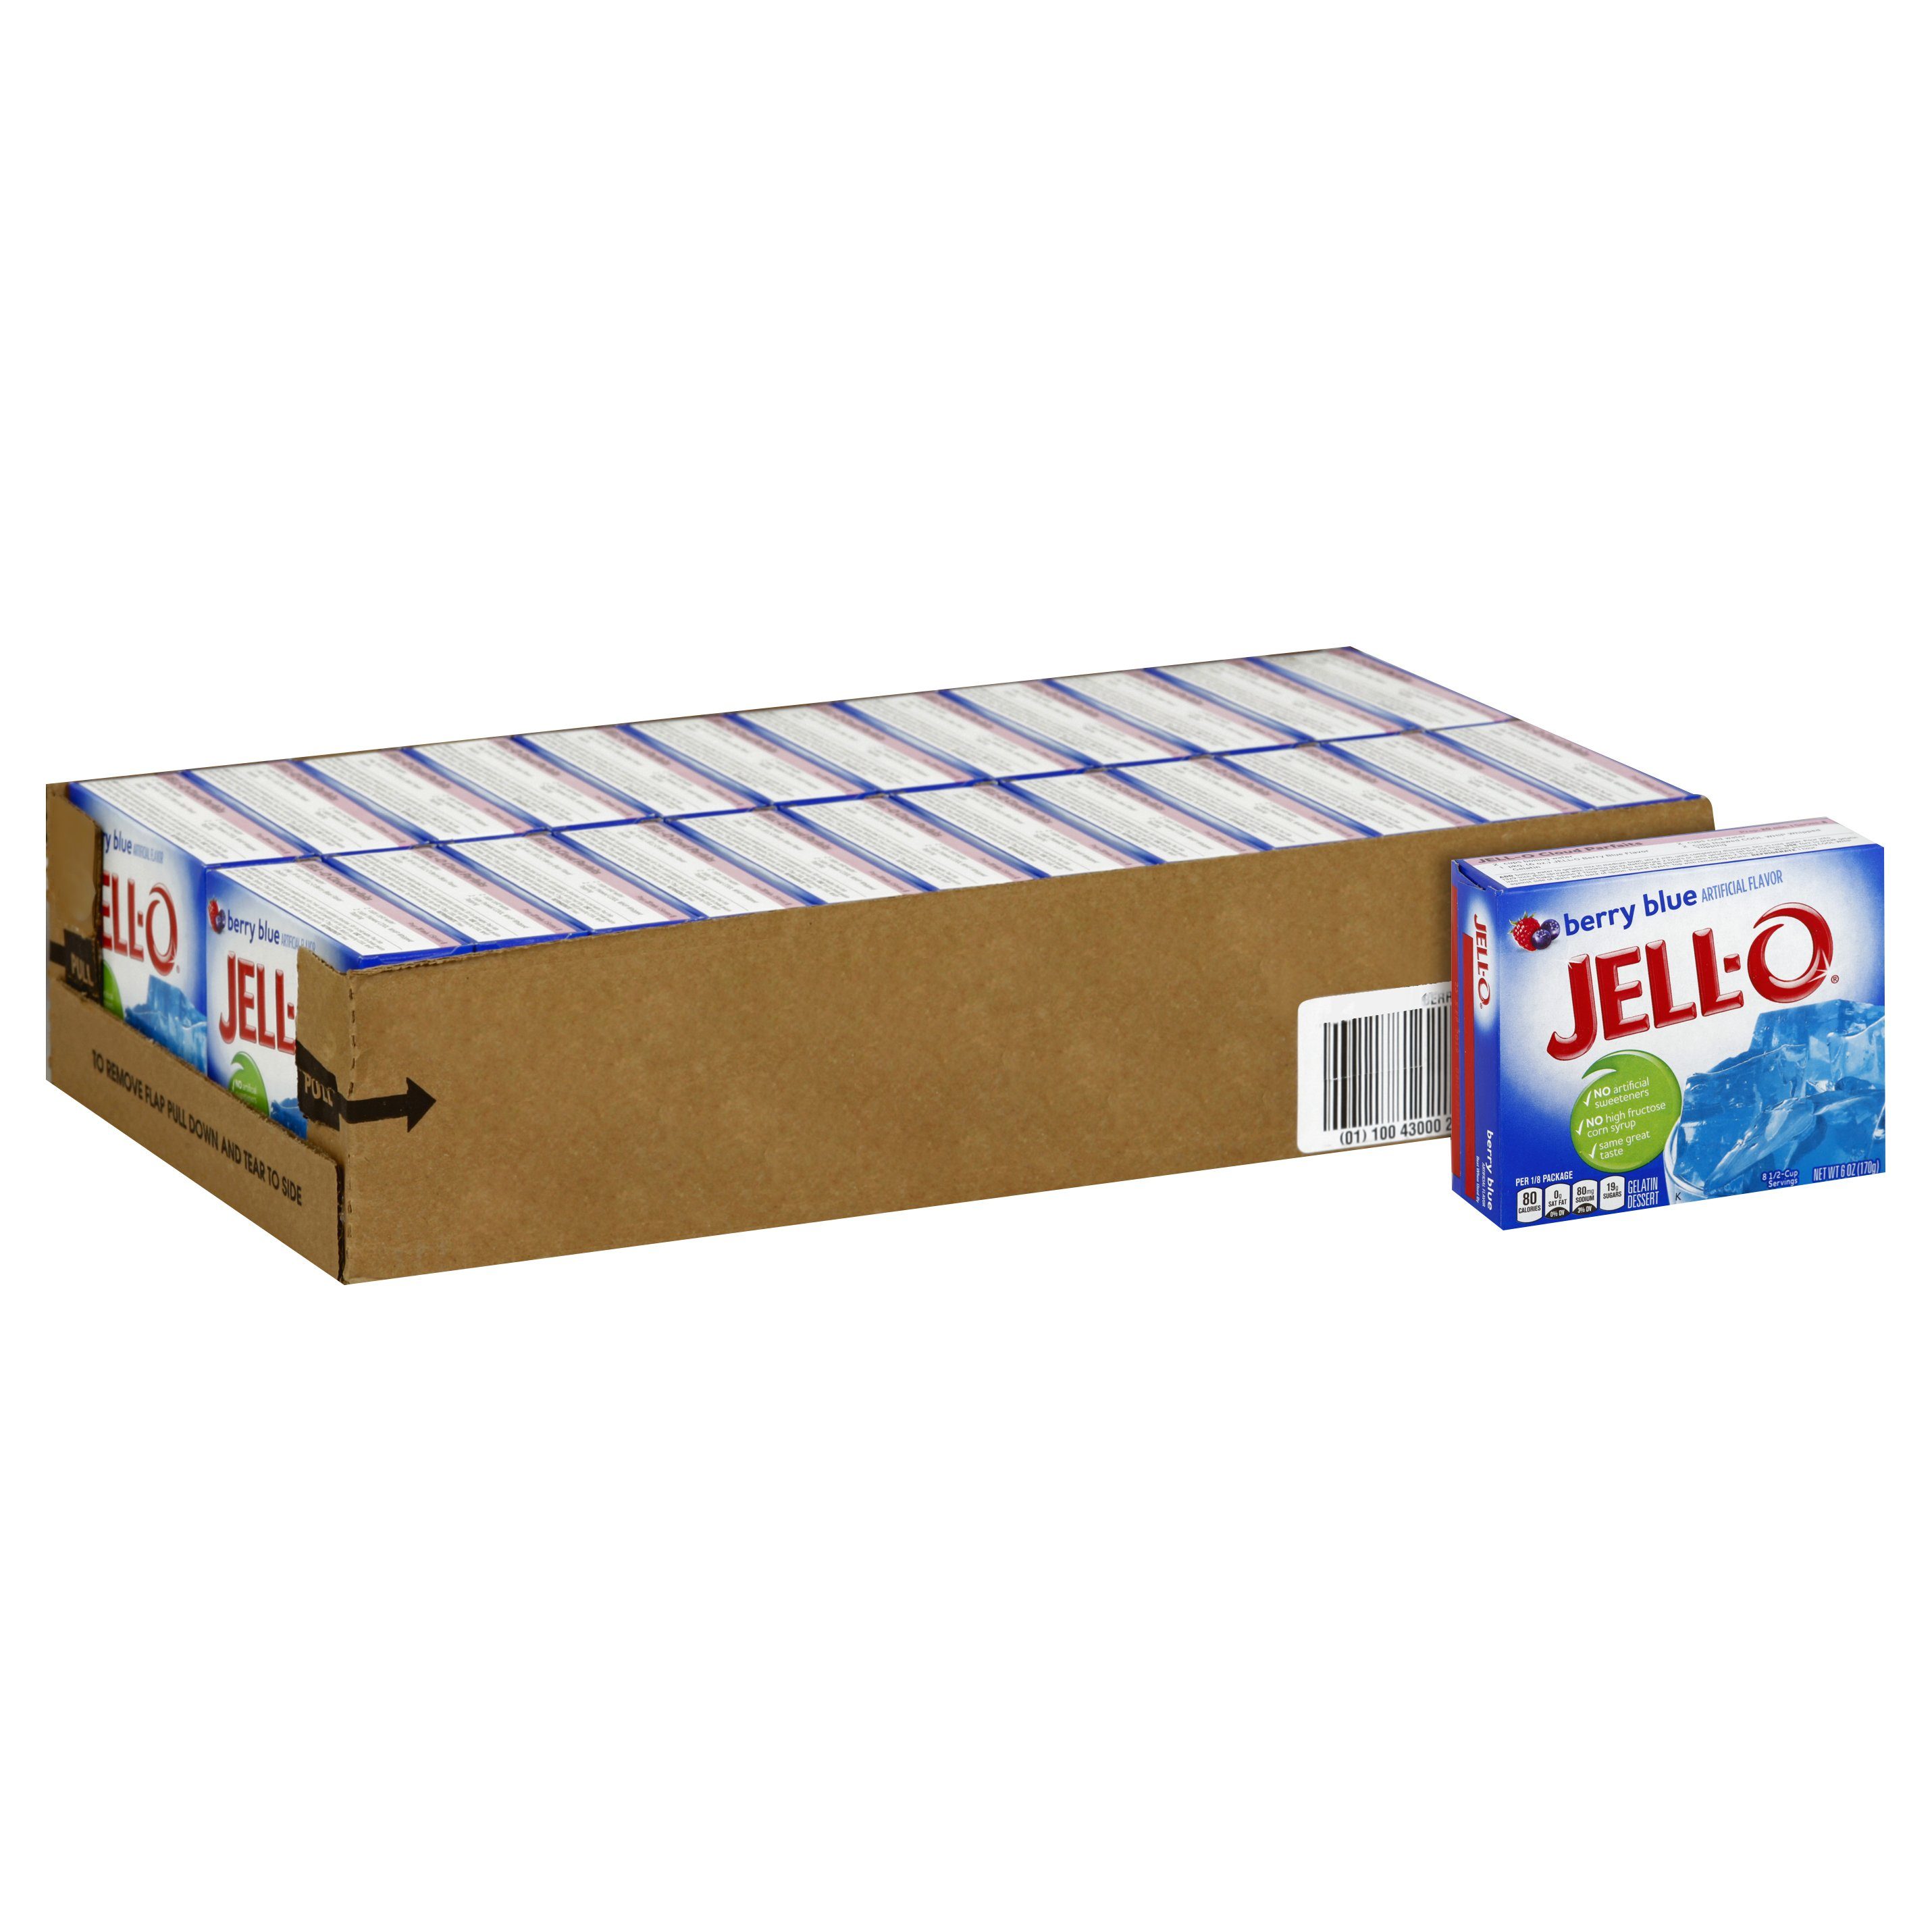 Jell-O Gelatin Mix Jell-O Berry Blue 6 Oz-24 Count 